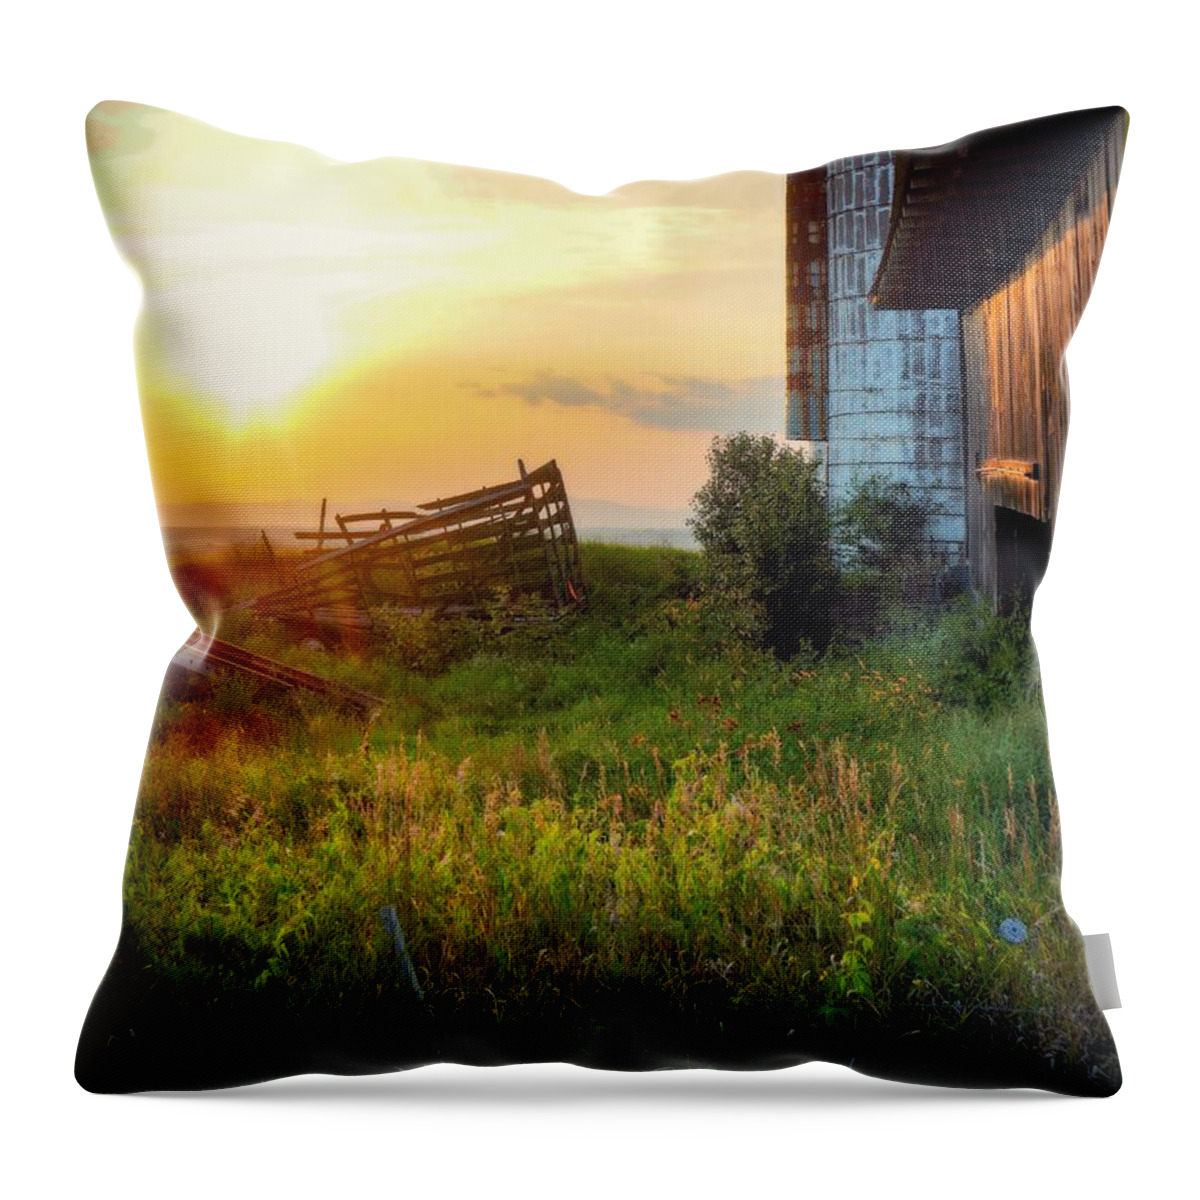  Throw Pillow featuring the photograph Another Beautiful Day by Kendall McKernon